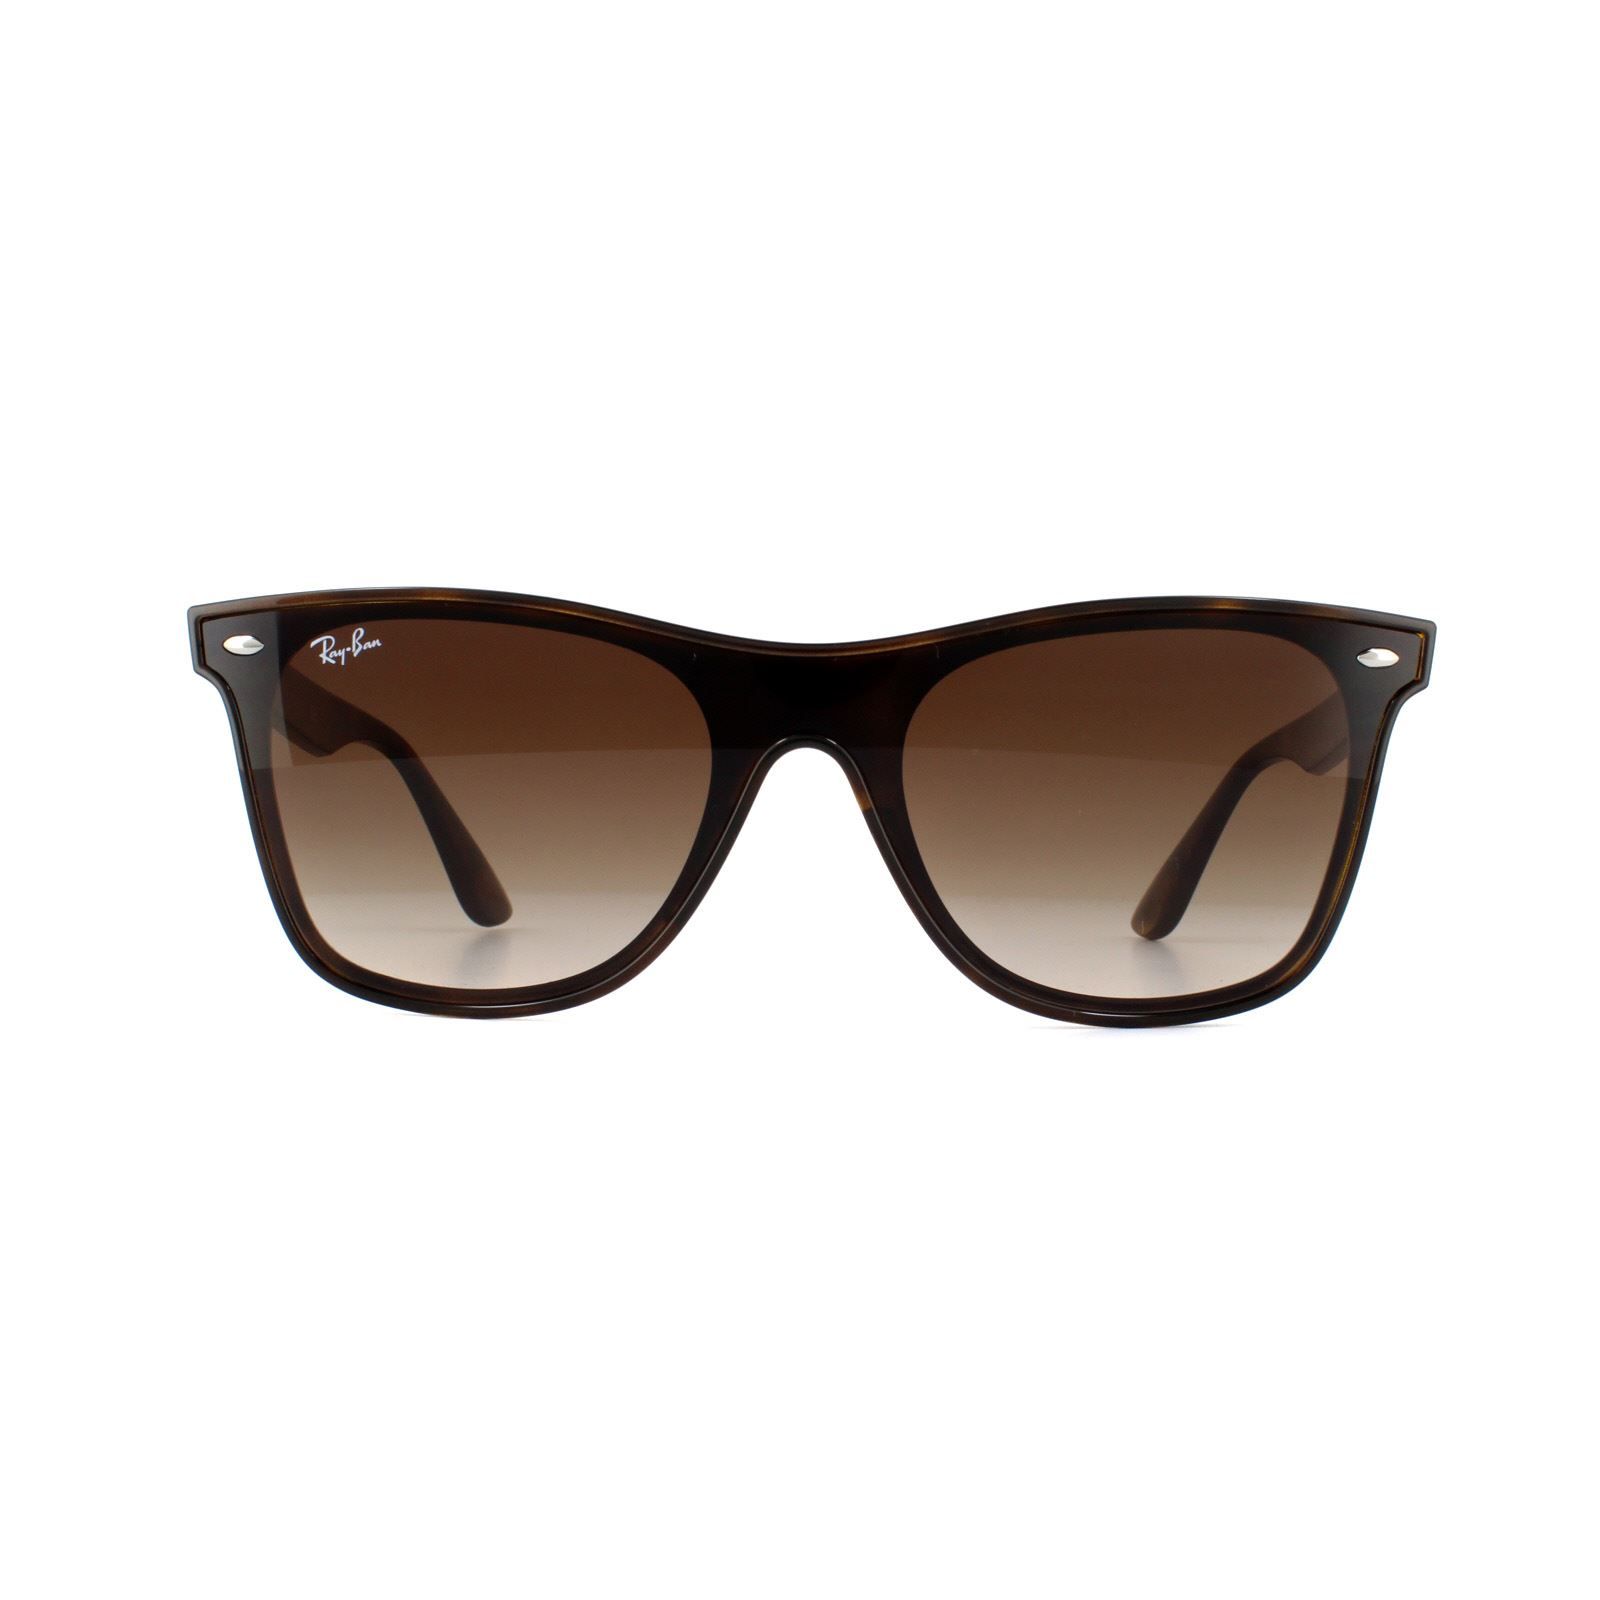 Ray-Ban Sunglasses Blaze Wayfarer 4440N 710/13 Light Havana Brown Gradient are a lens-over-frame version of the iconic wayfarer style in the latest Blaze collection of futuristic versions of modern classics.